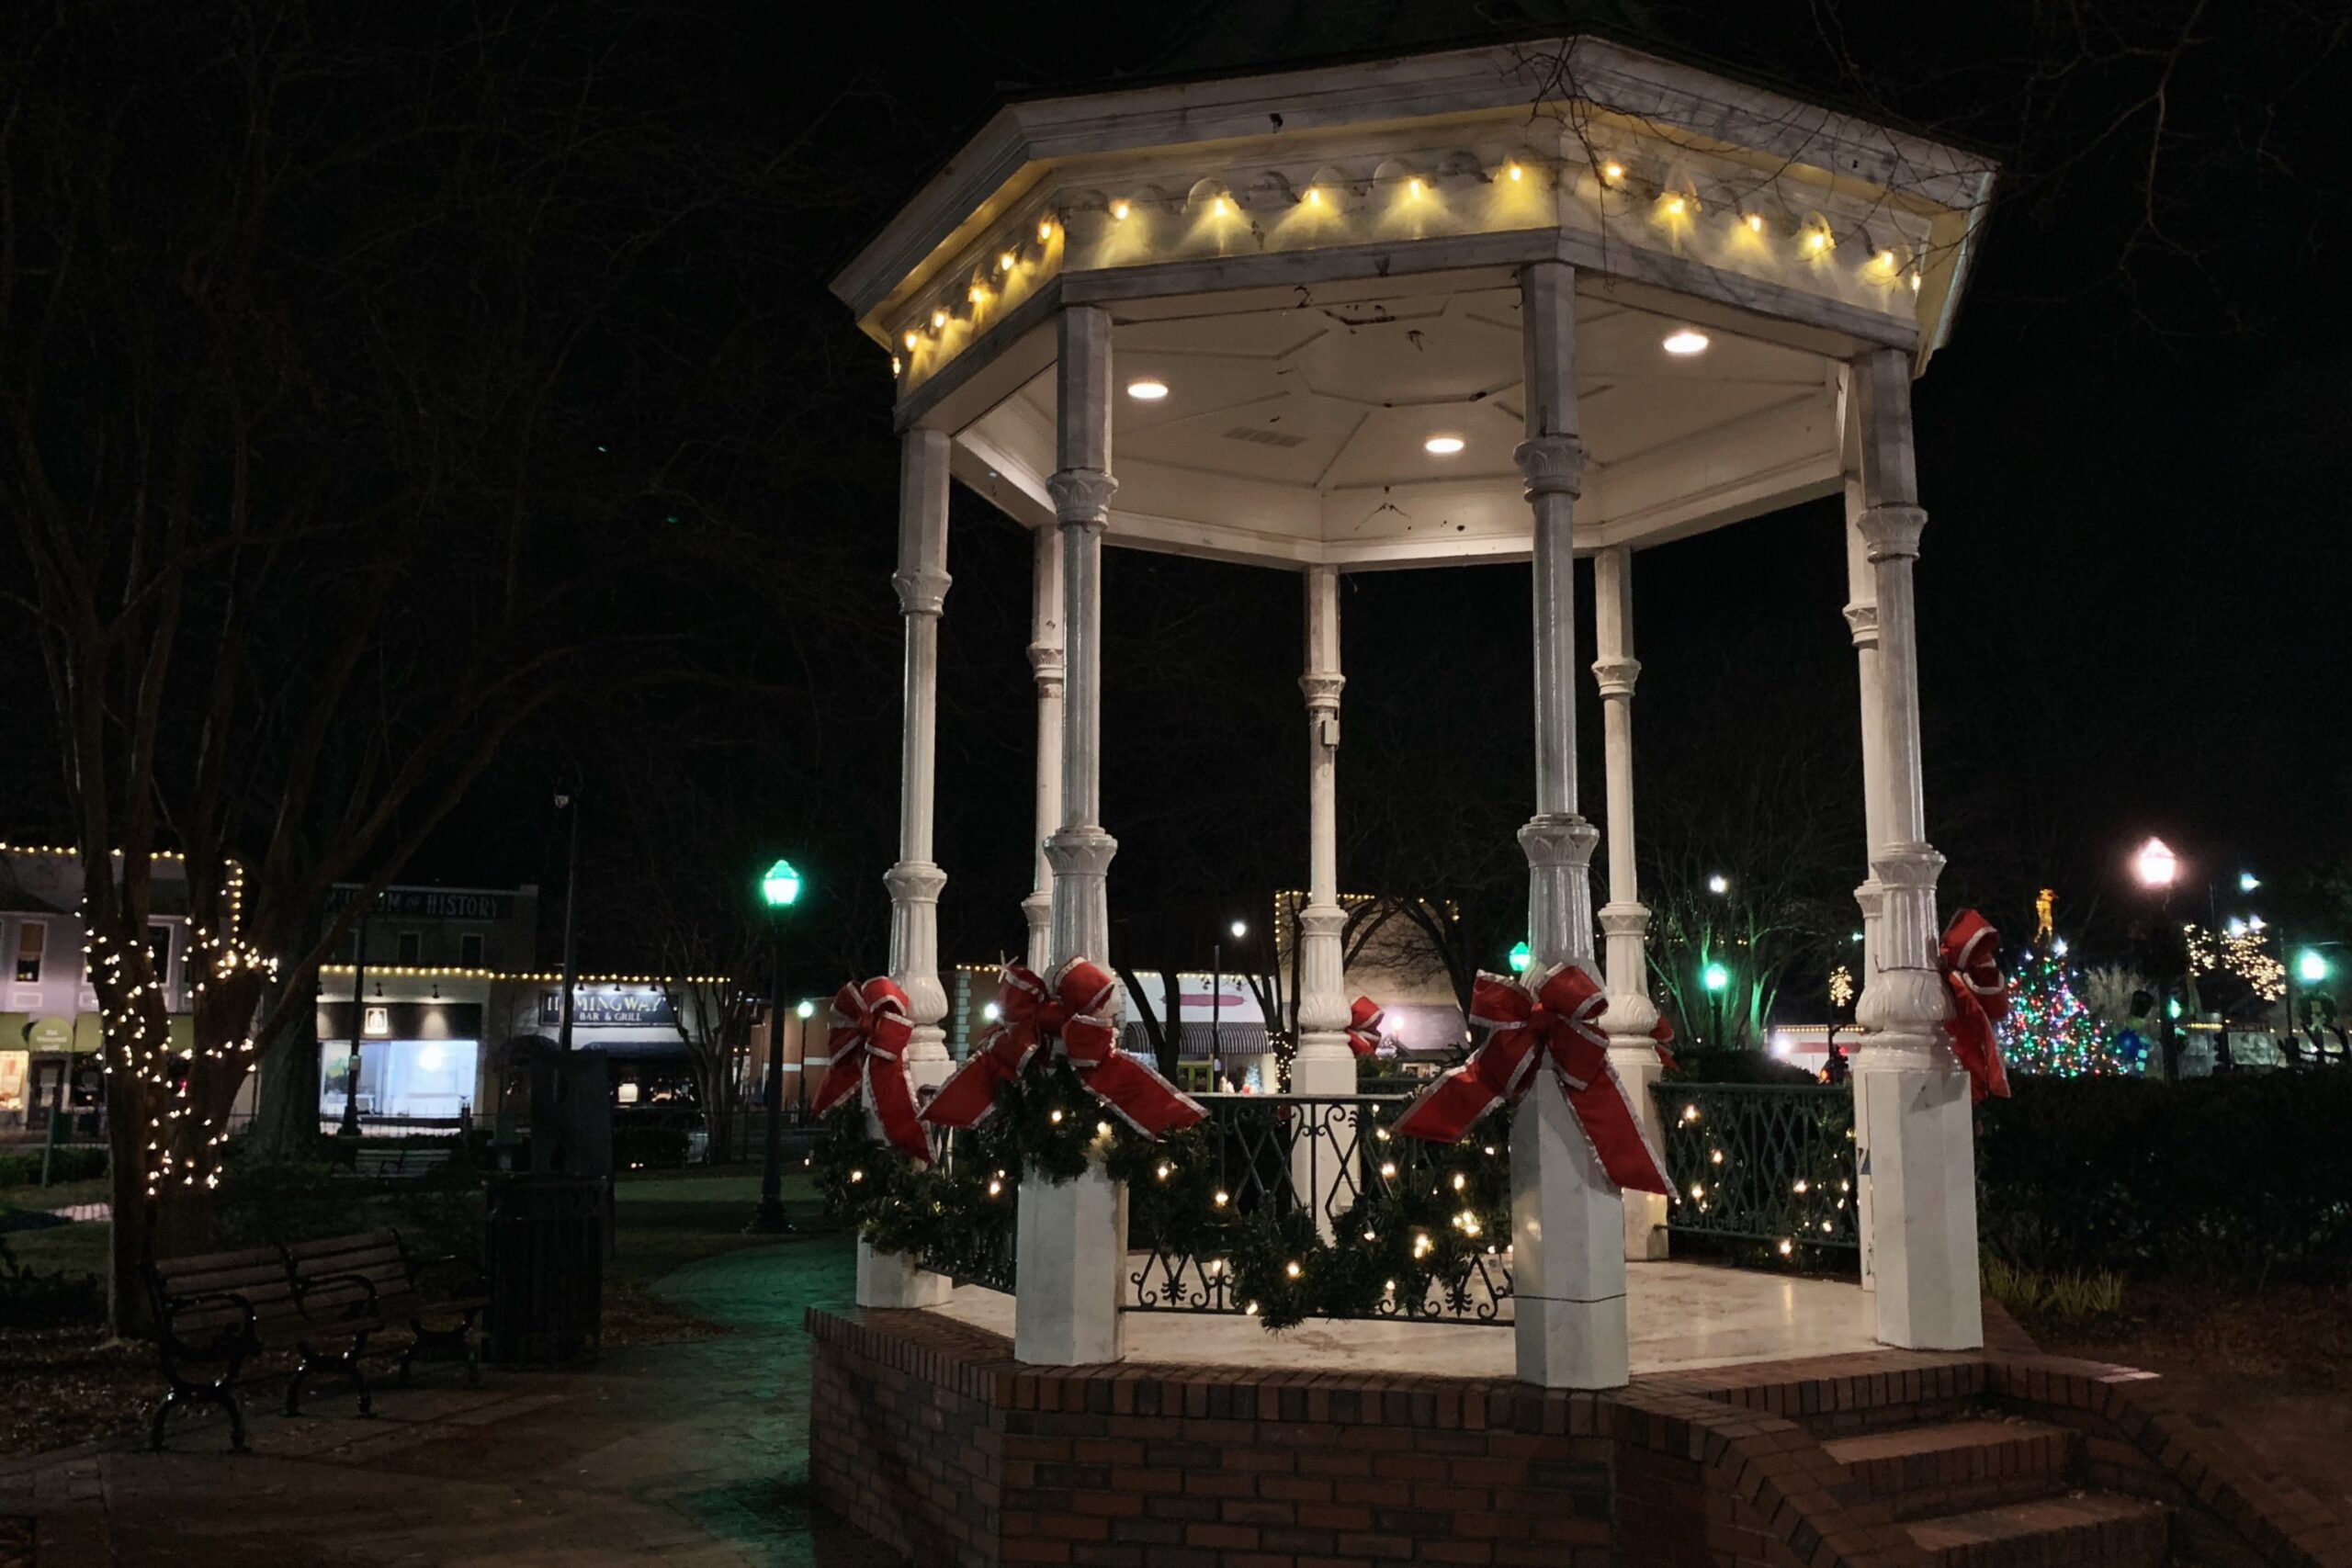 pavilion on marietta square decked out in holiday garland and lights